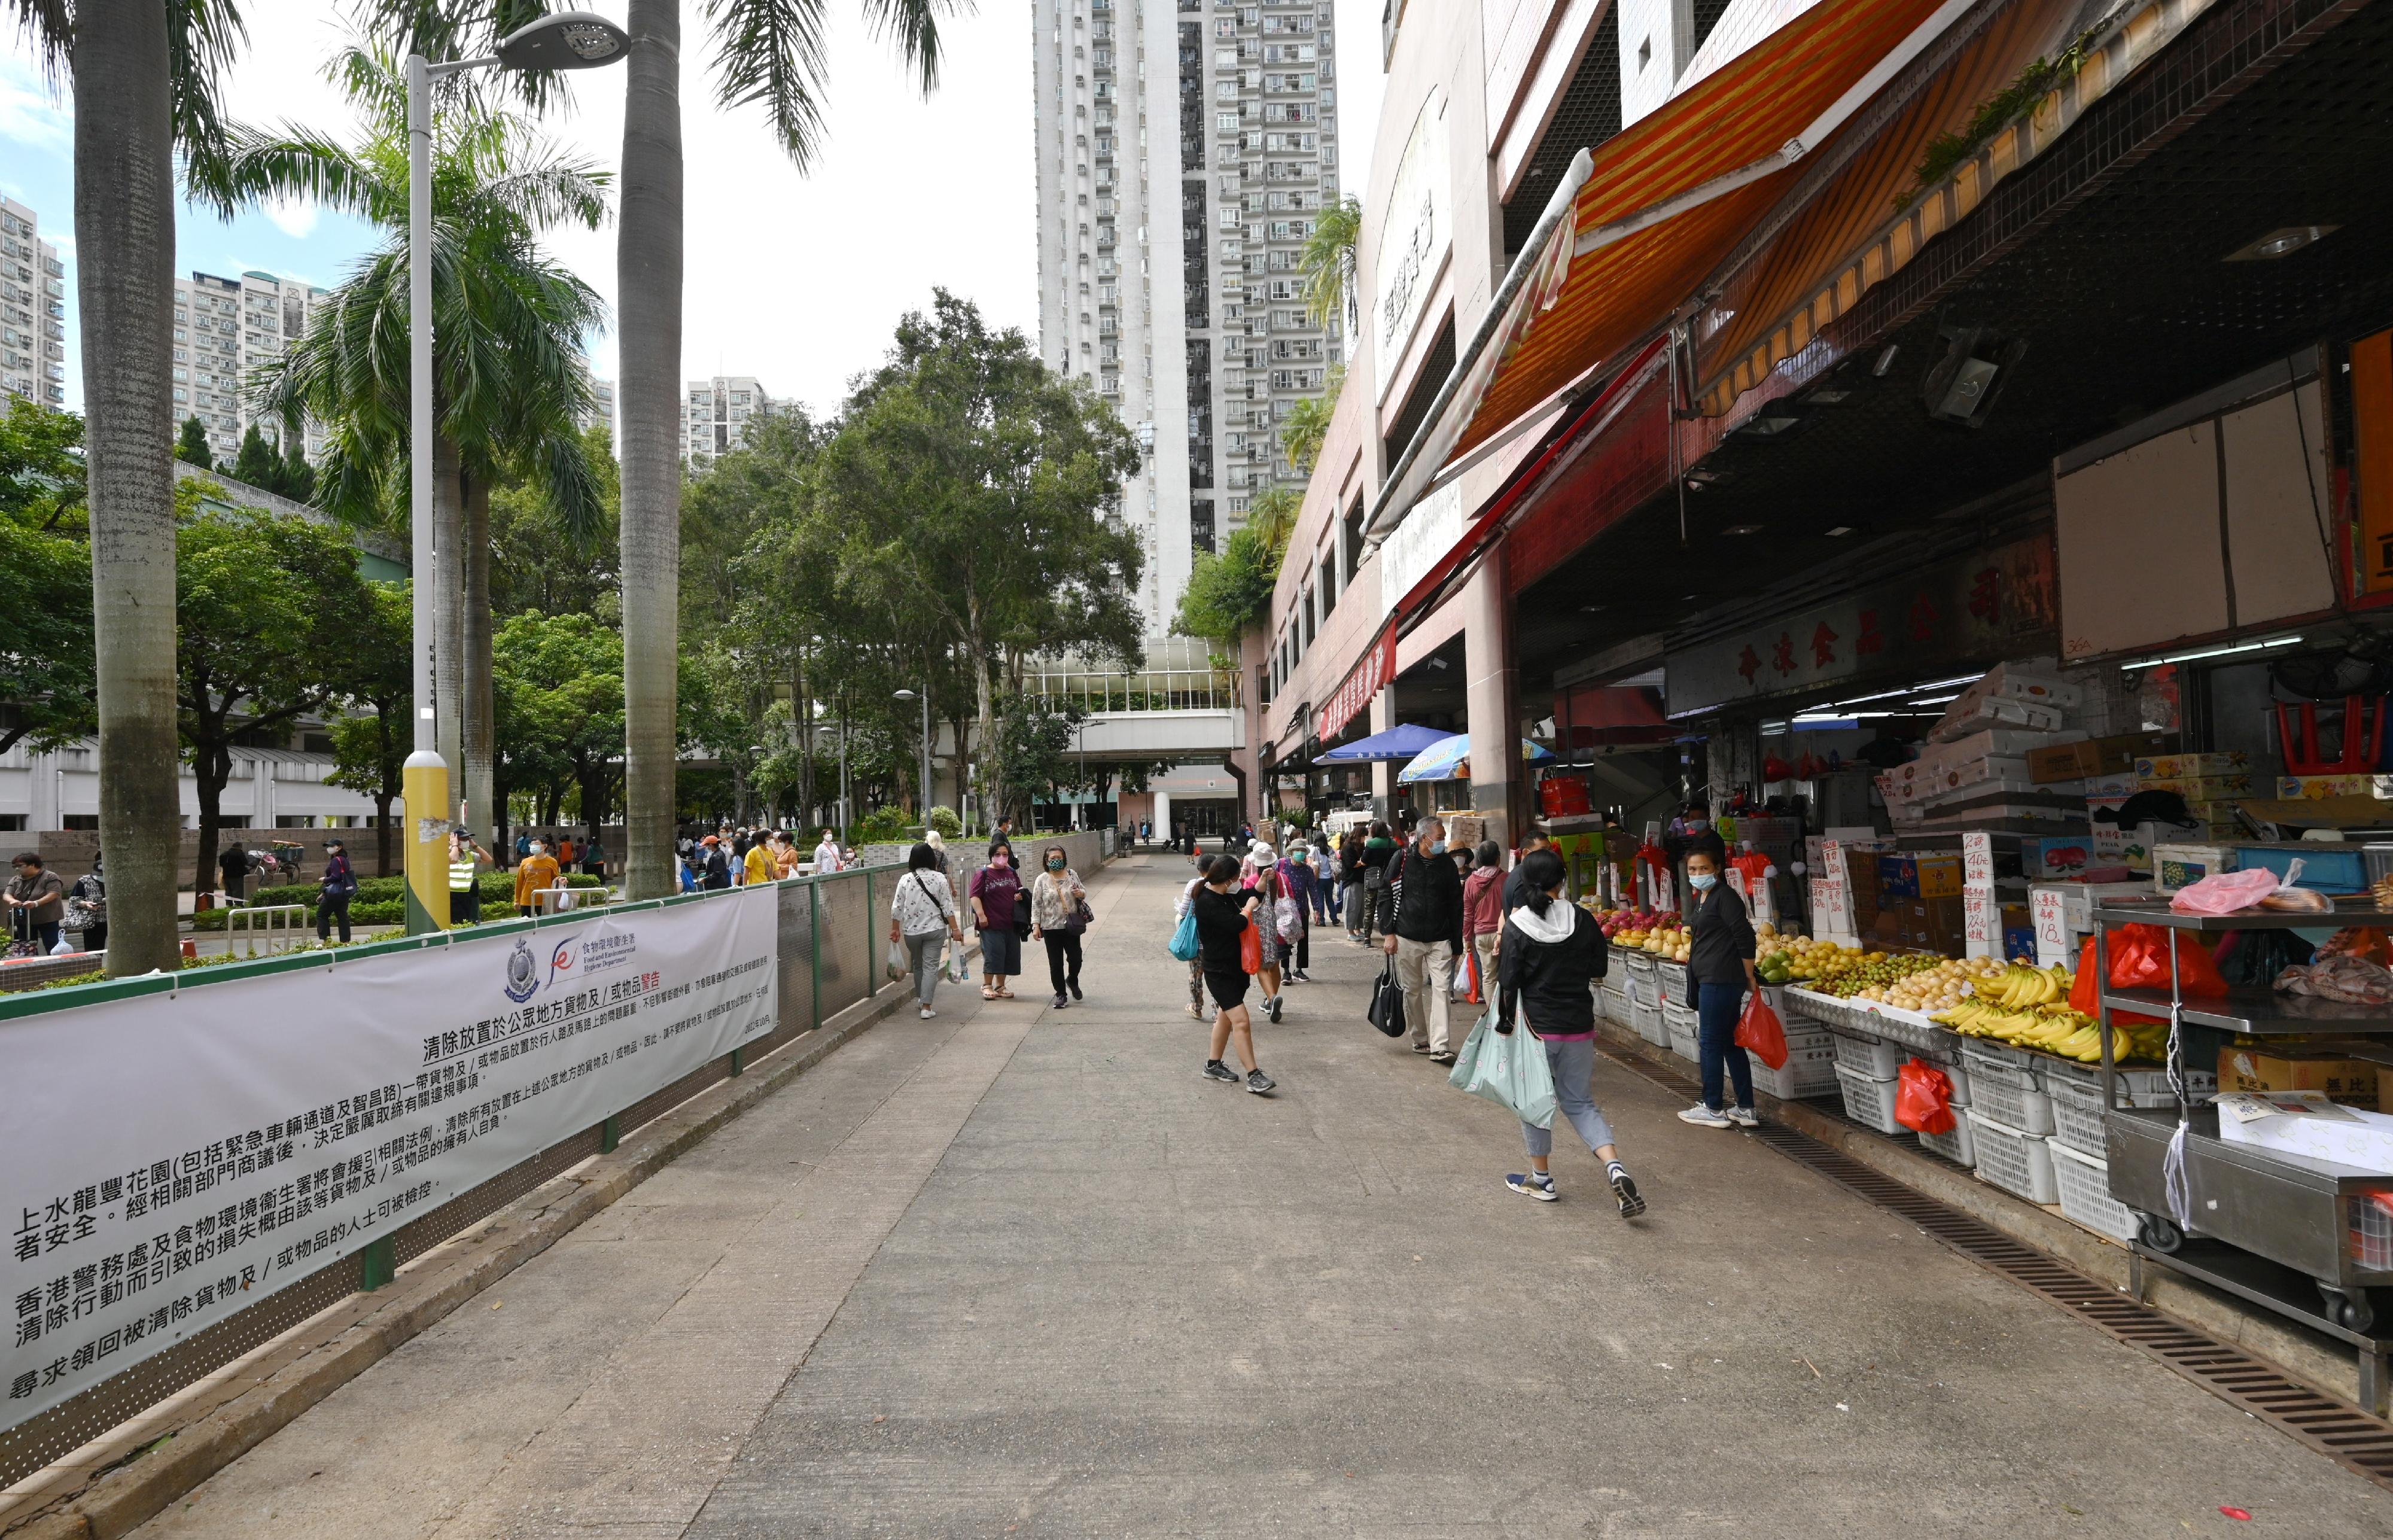 A spokesman for the Food and Environmental Hygiene Department (FEHD) said today (October 24) that the FEHD and the Hong Kong Police Force have conducted a series of stringent enforcement actions against illegal shop front extension activities in various districts since October 3. Photo shows the condition of a street in the Sheung Shui district after a joint operation.